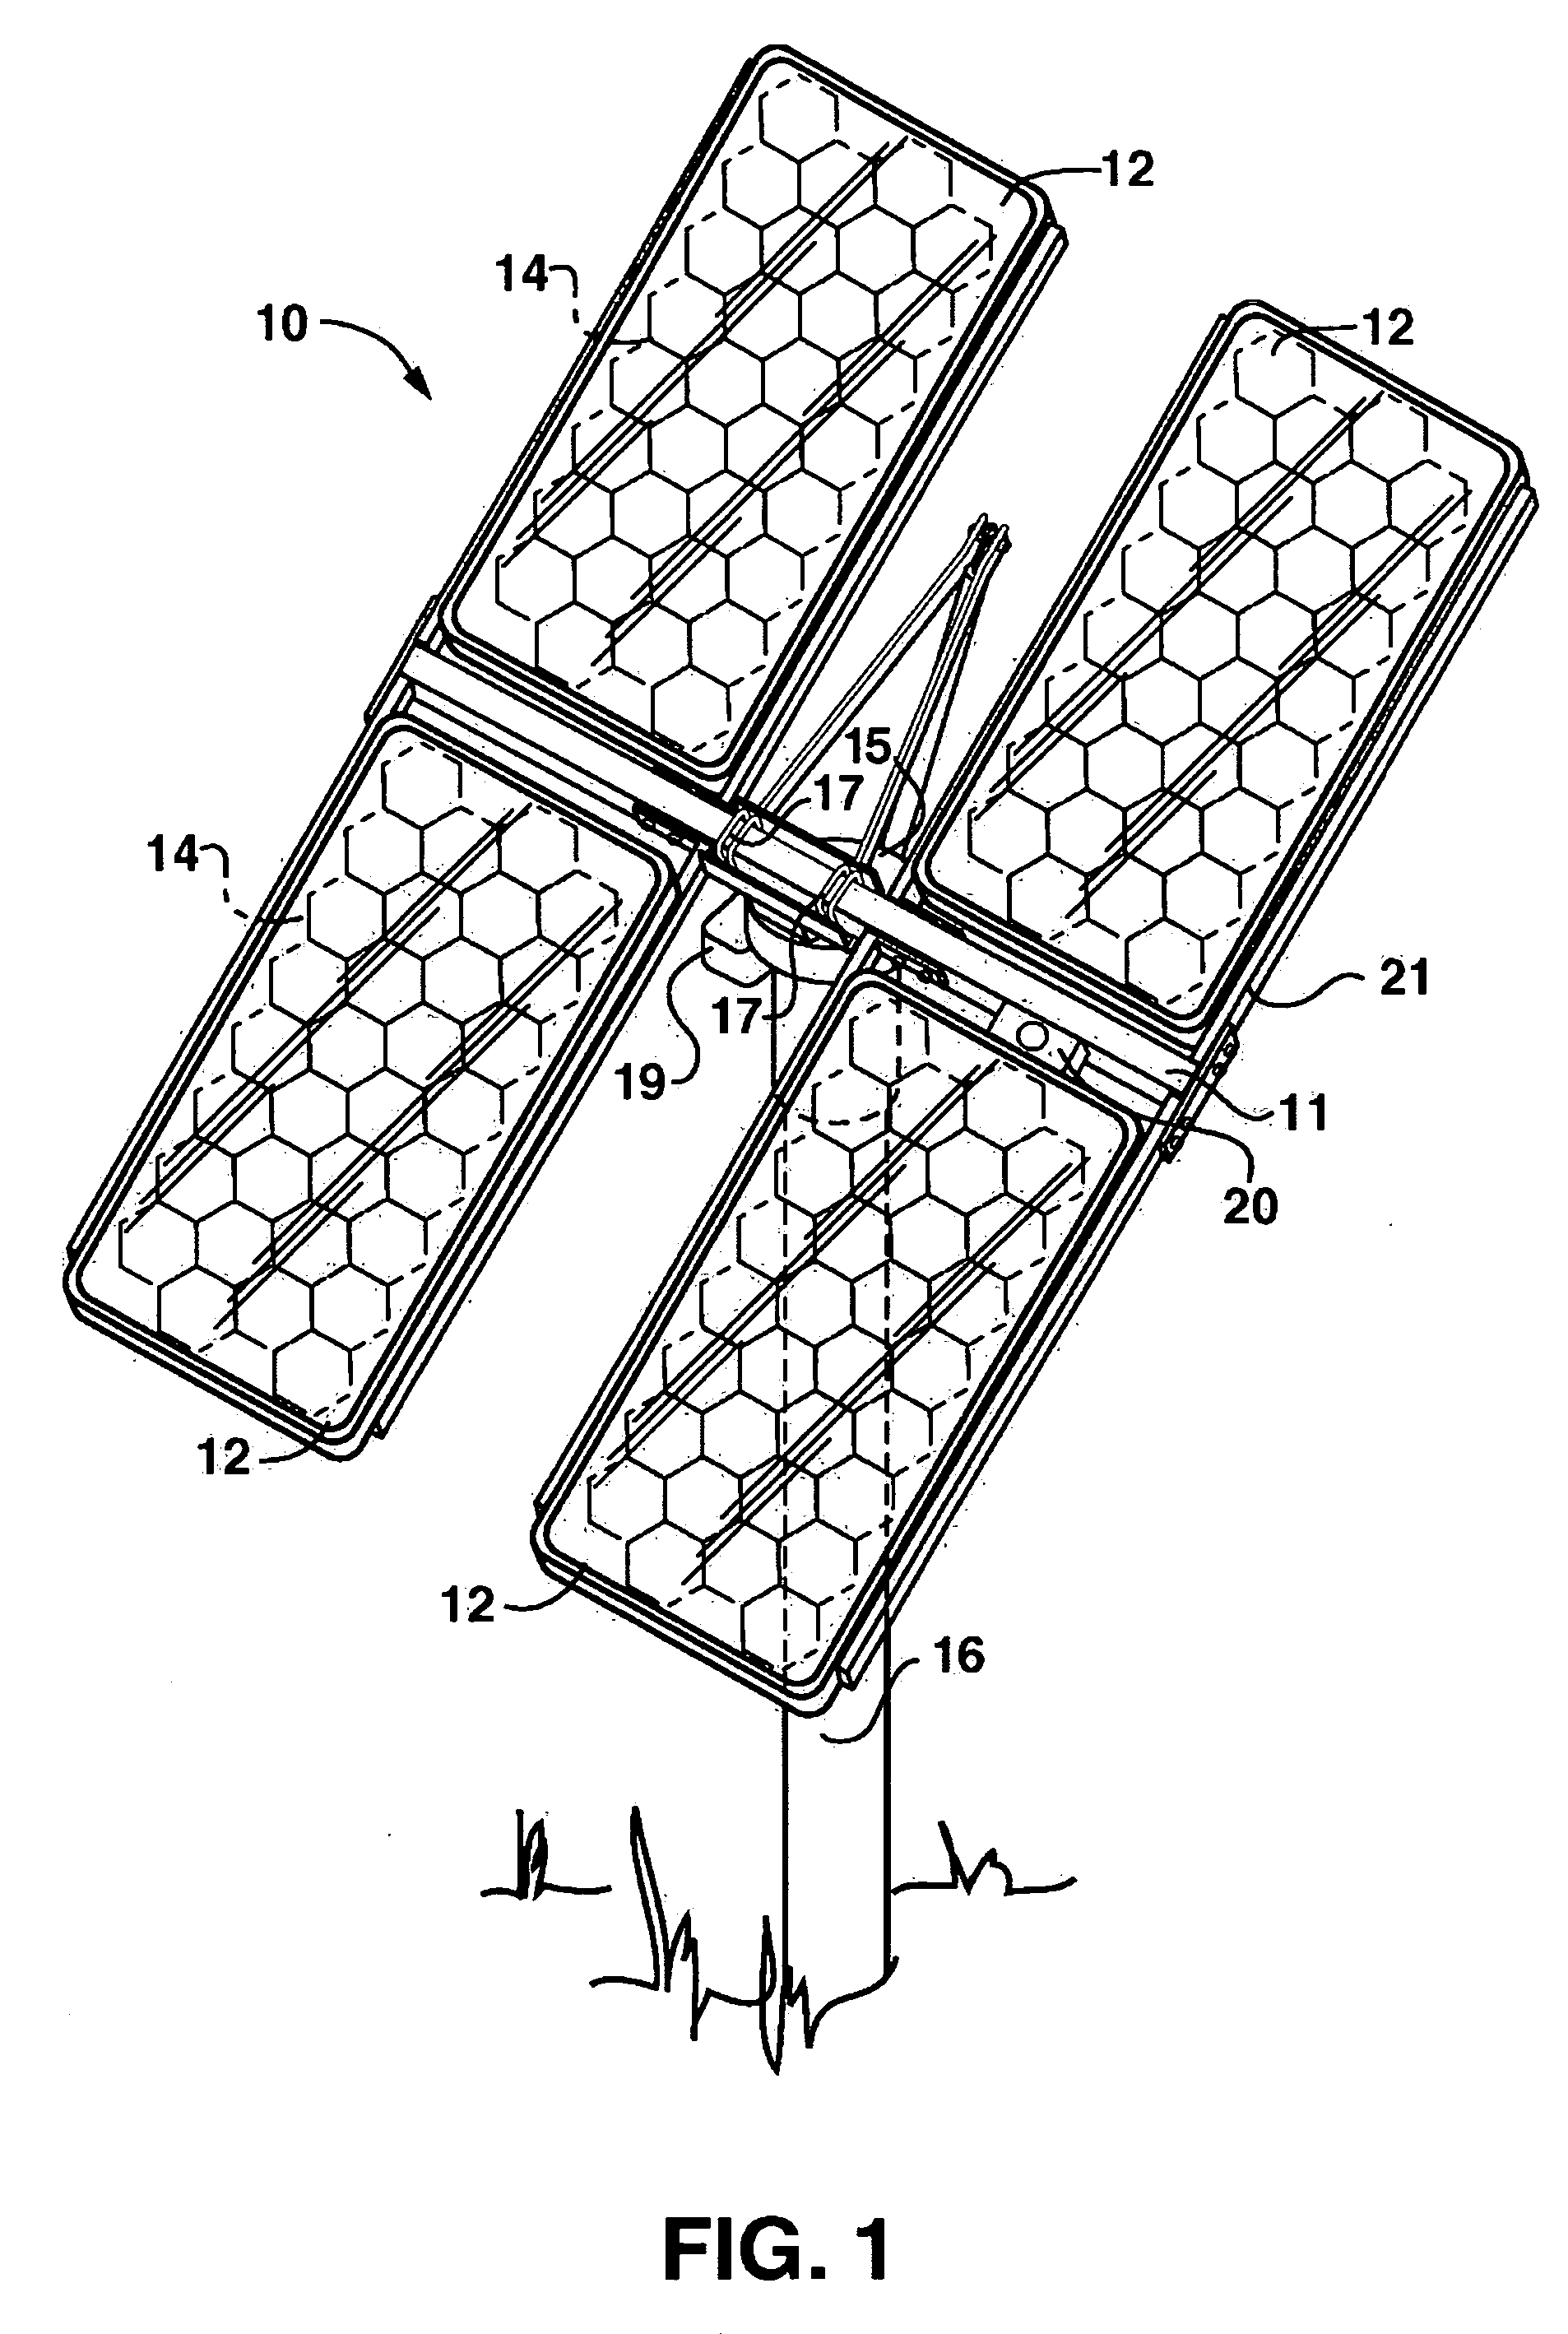 Concentrator solar photovoltaic array with compact tailored imaging power units